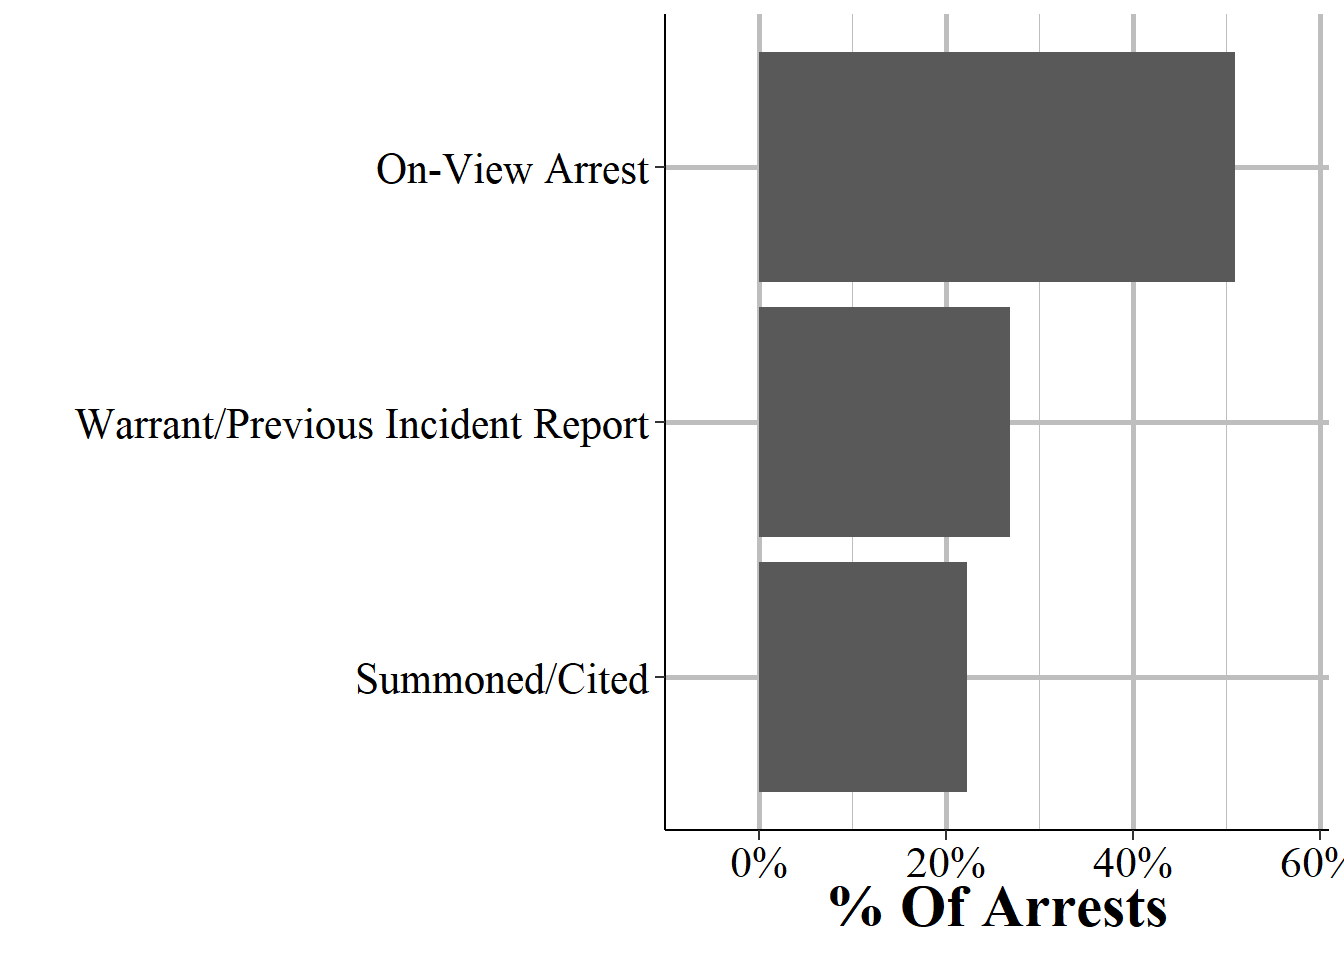 The distribution of arrests by type of arrest. Previous Incident Report includes cases where an individual was arrested for a separate crime and are then reported as also arrested for this incident.